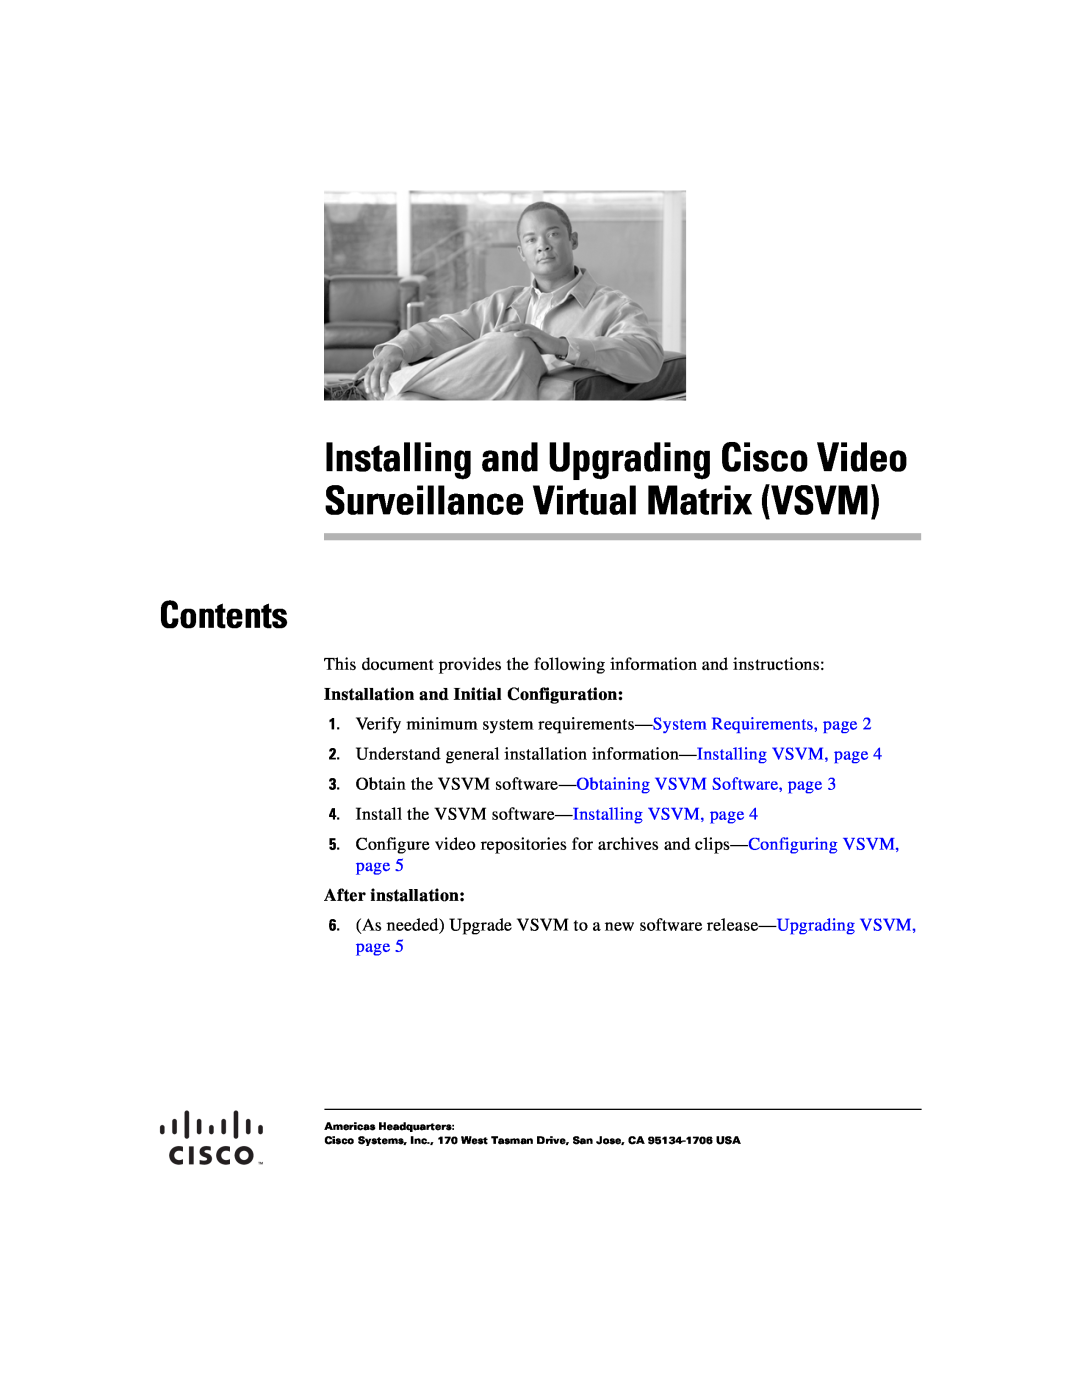 Cisco Systems VSVM manual Contents, Installation and Initial Configuration, After installation 